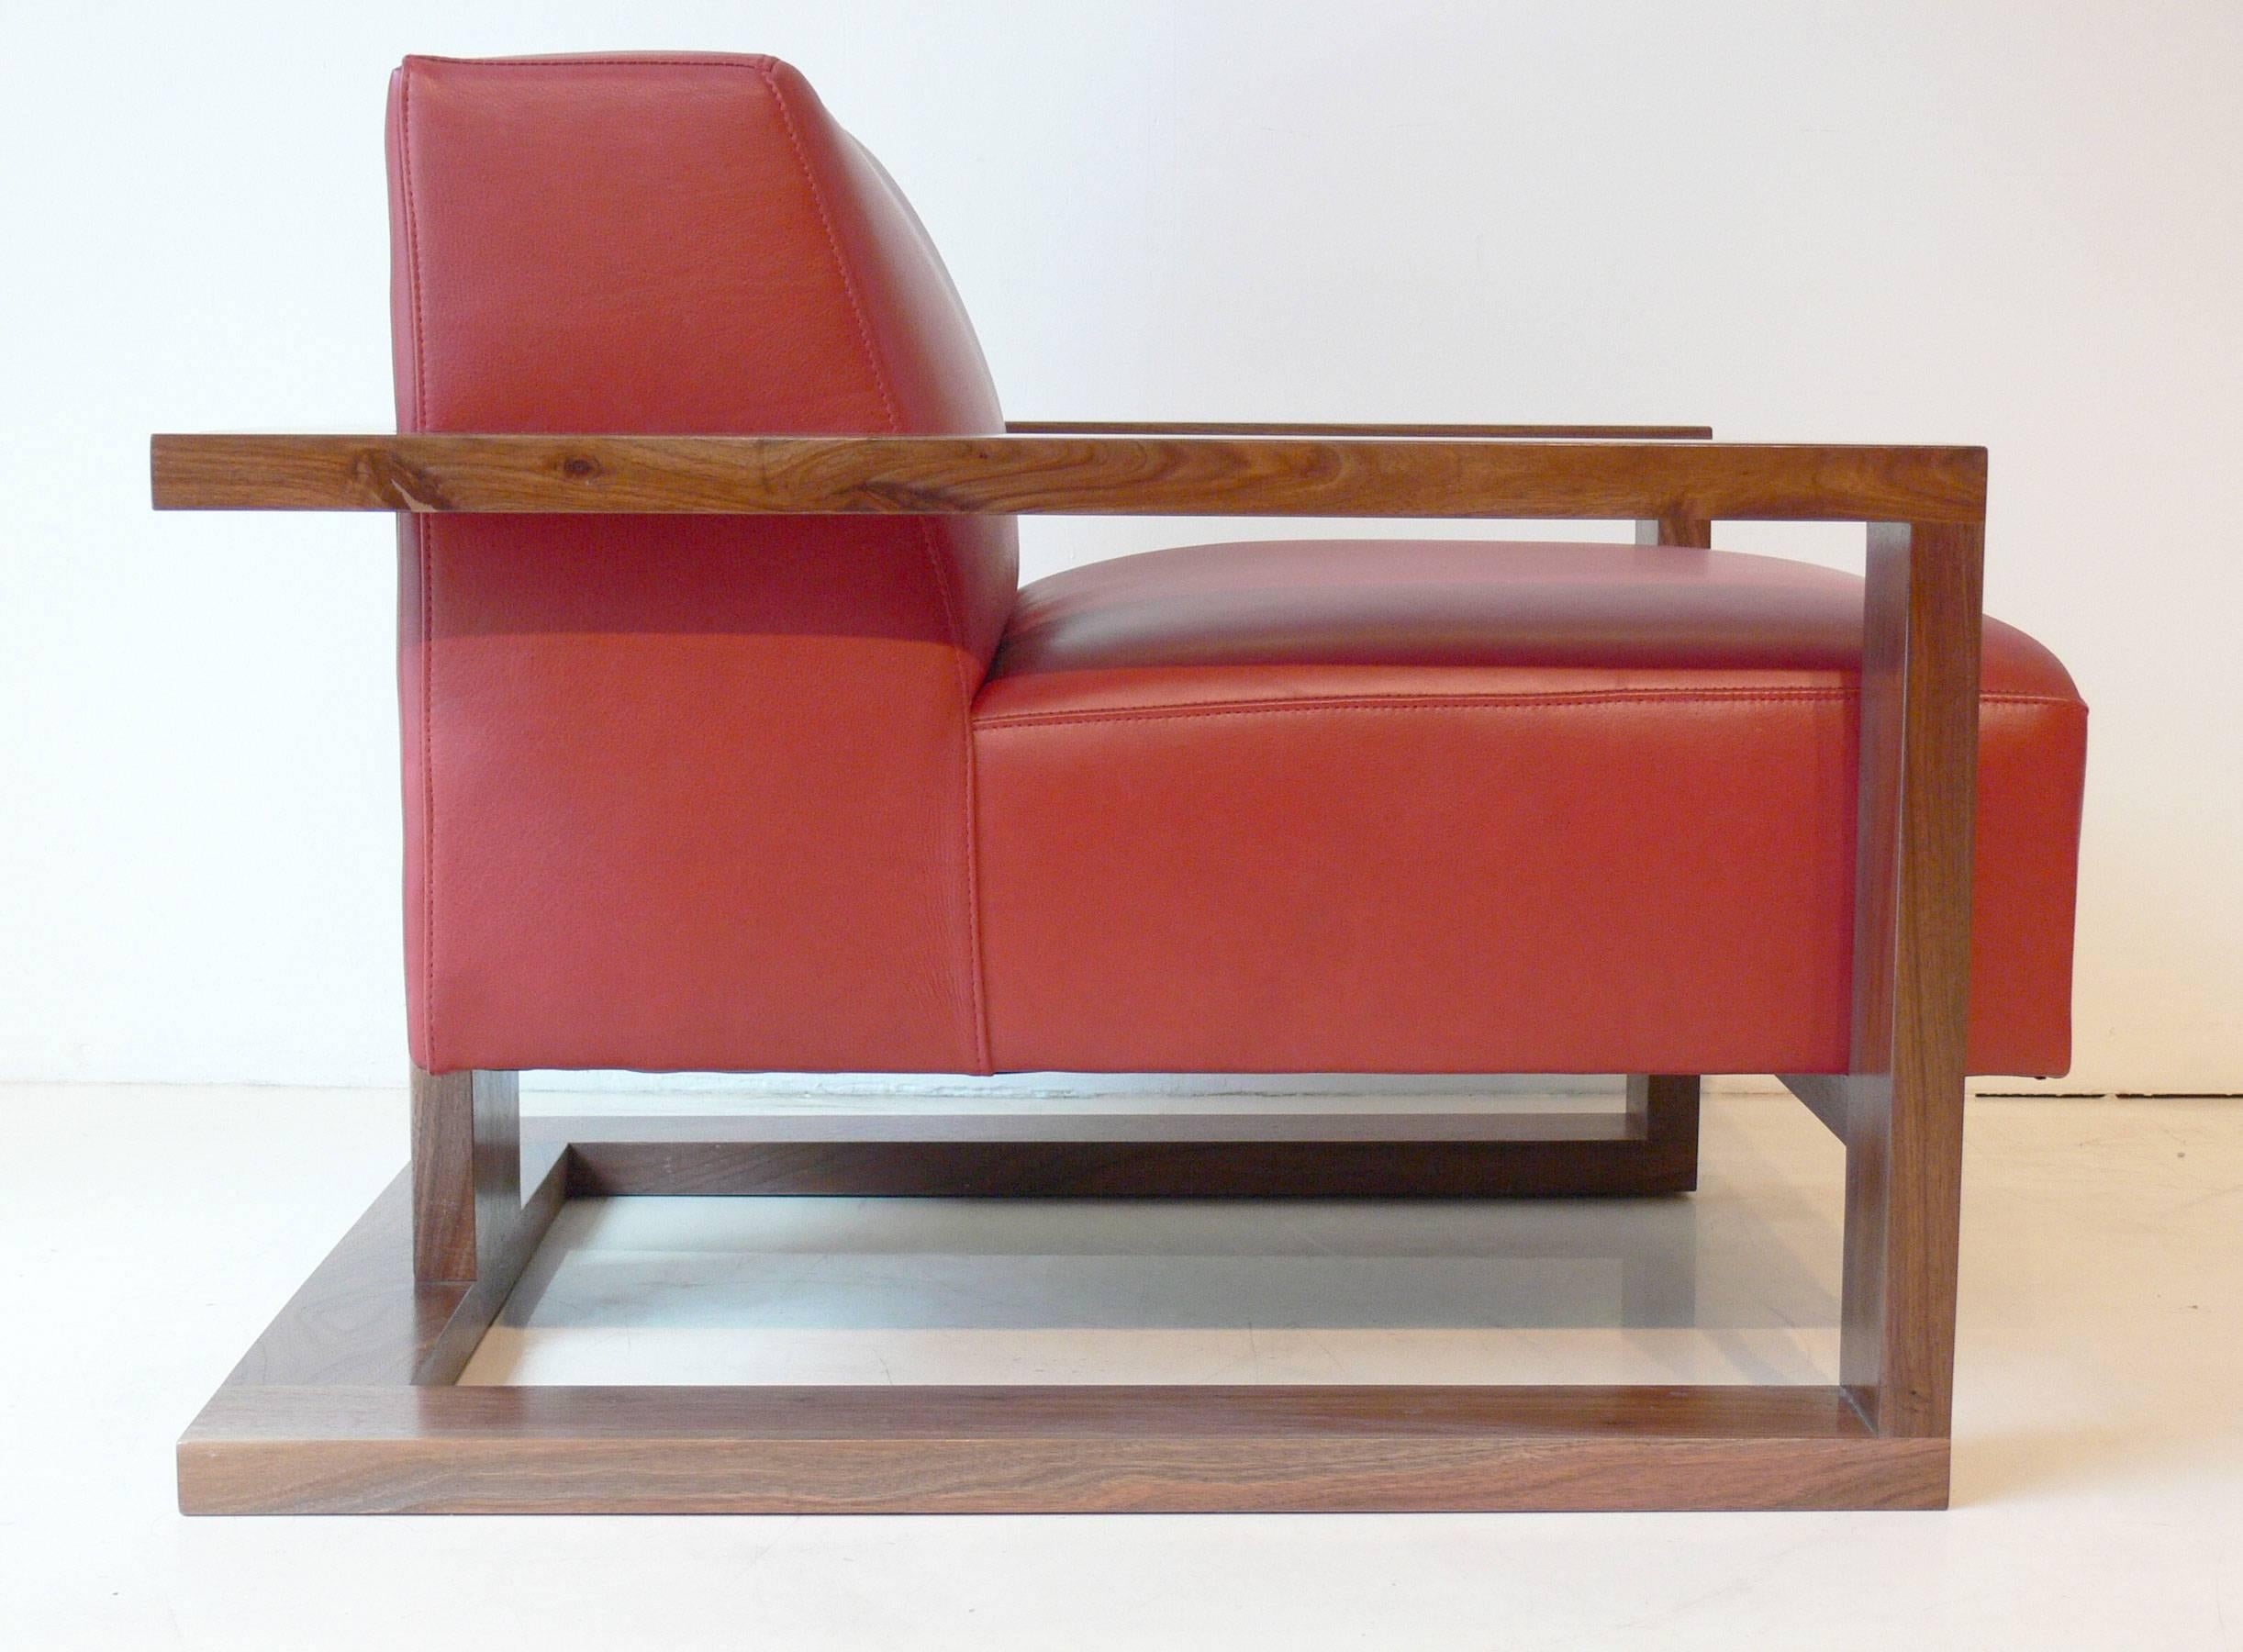 The Caribou lounge chair is a low lounge that features a hardwood exposed frame. It is being offered here upholstered in red leather, however we have options for upholstery. The frame is shown in walnut.